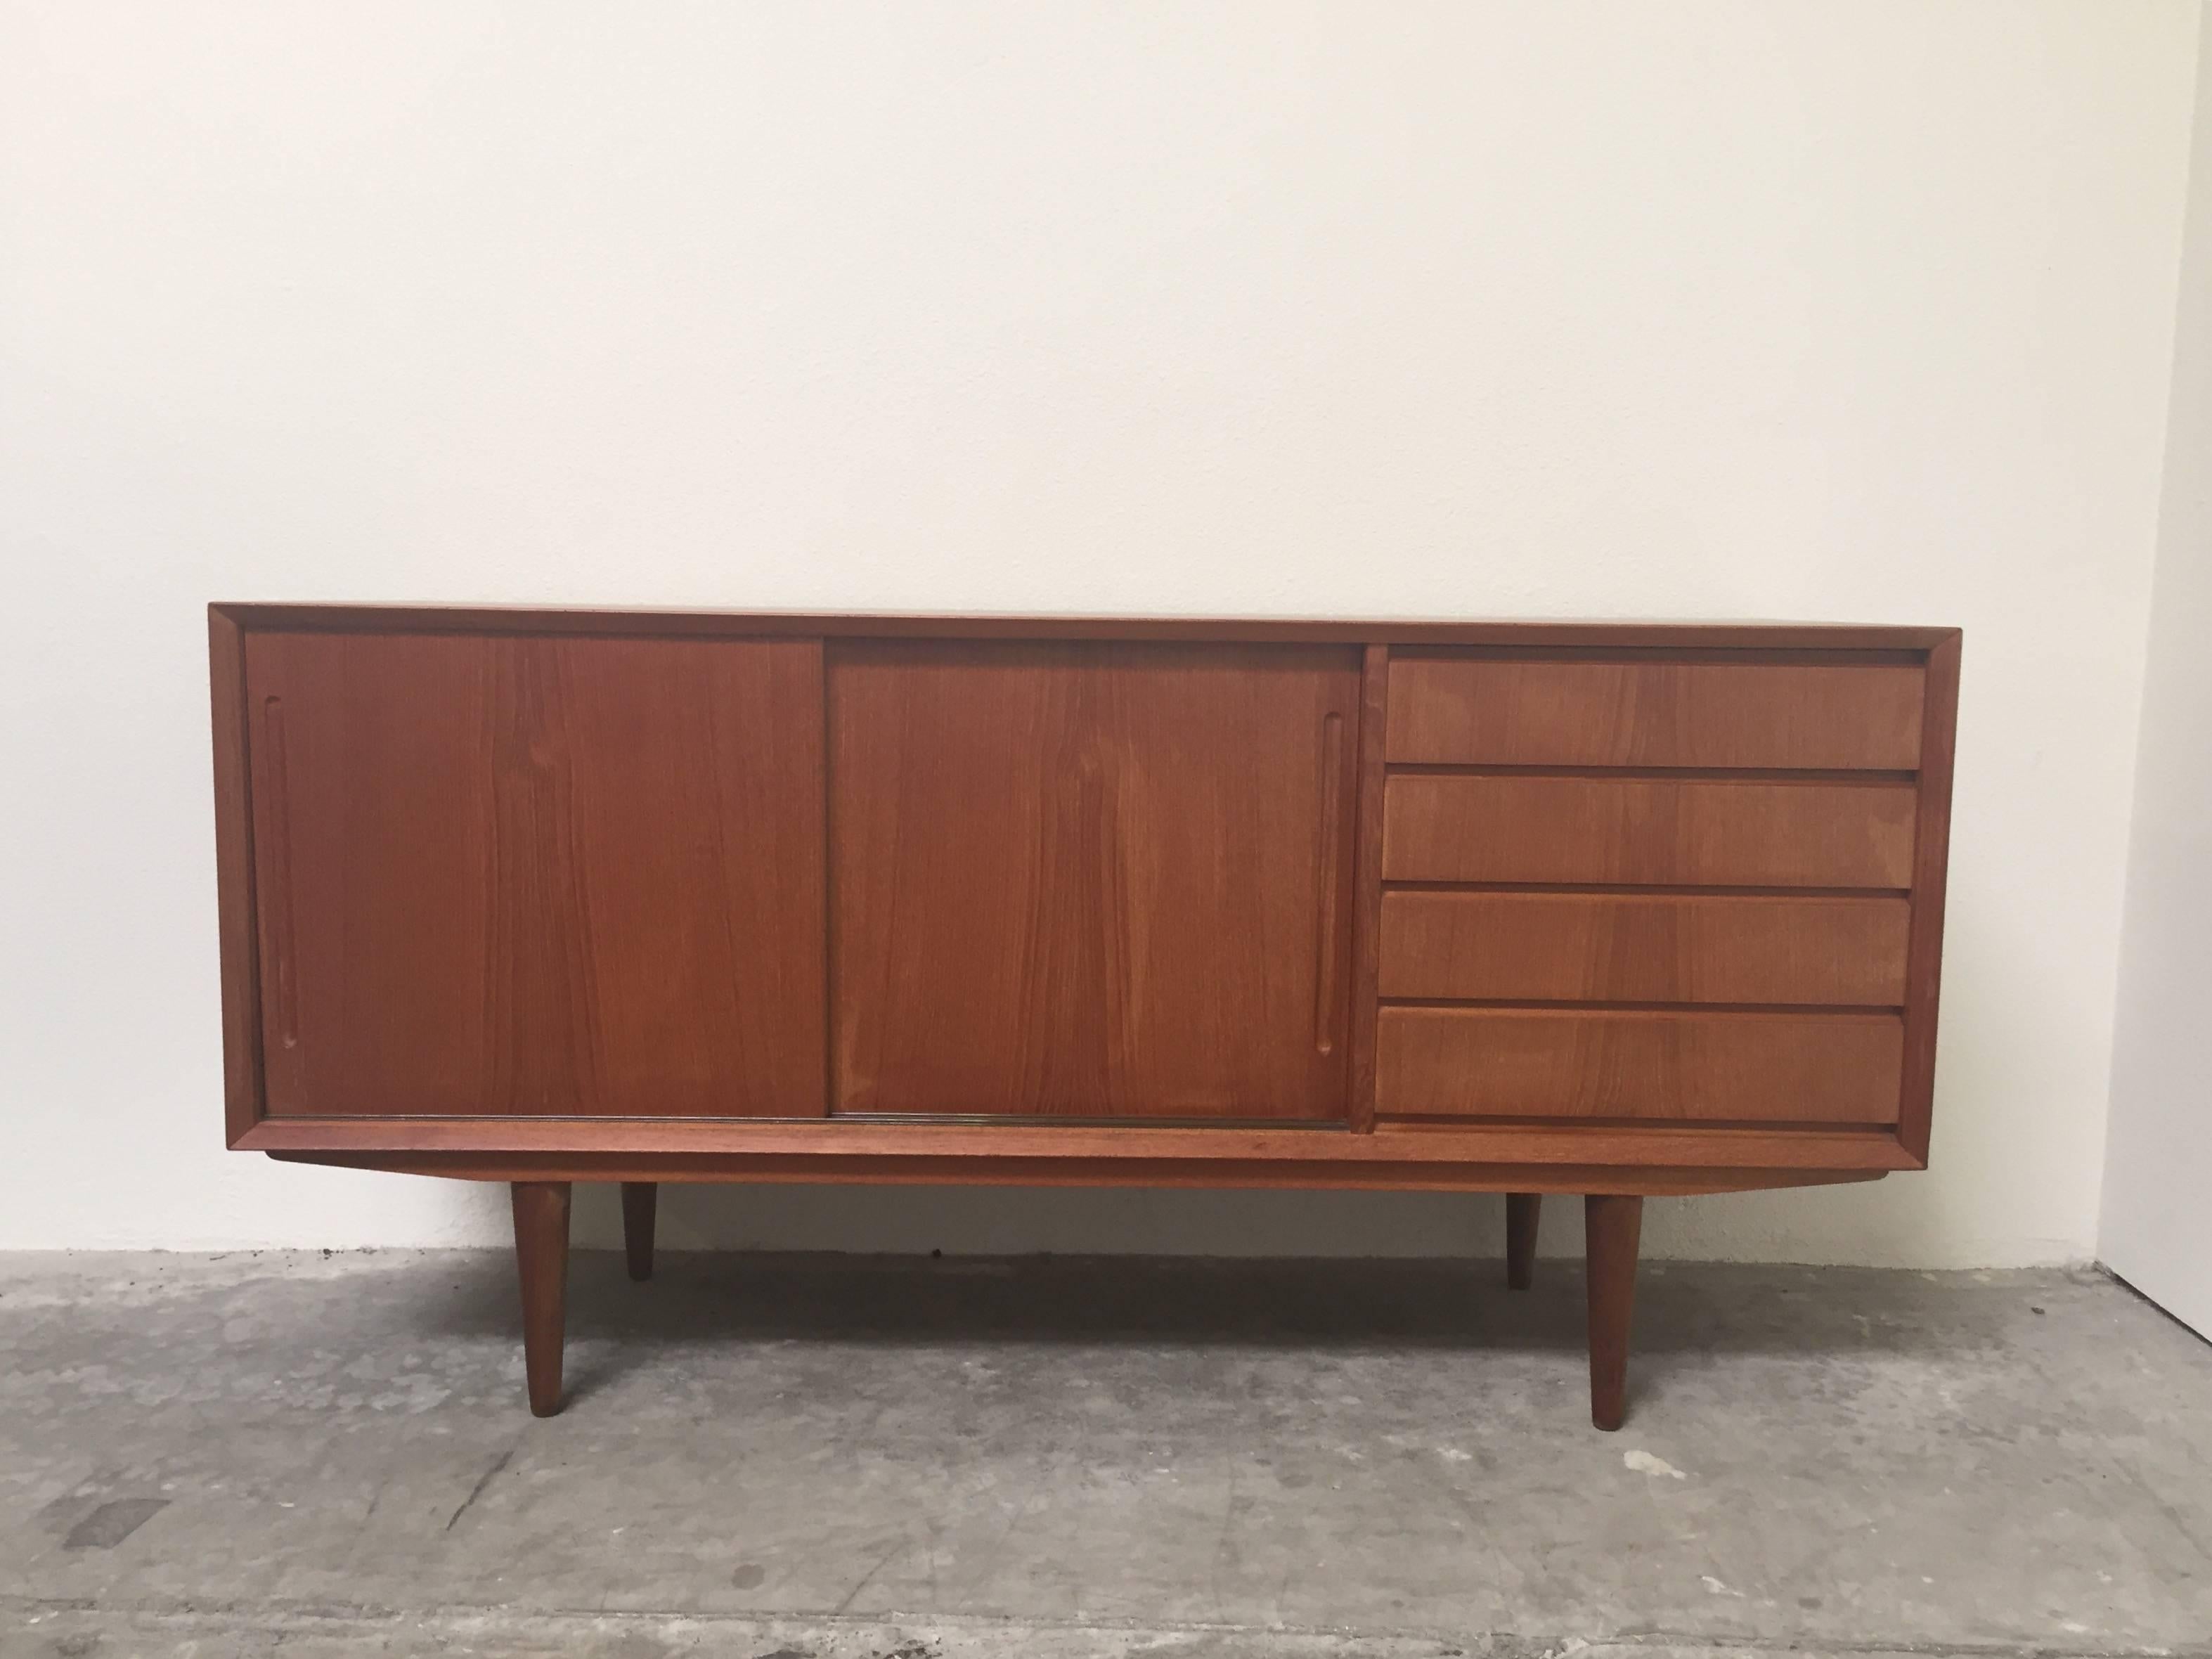 Fantastic Mid-Century Modern Danish teak sideboard in excellent vintage condition. Four drawers and two slider doors that open to two shelf compartments. Top drawer is lined with felt. The right side of the credenza has some small blonde spots, part